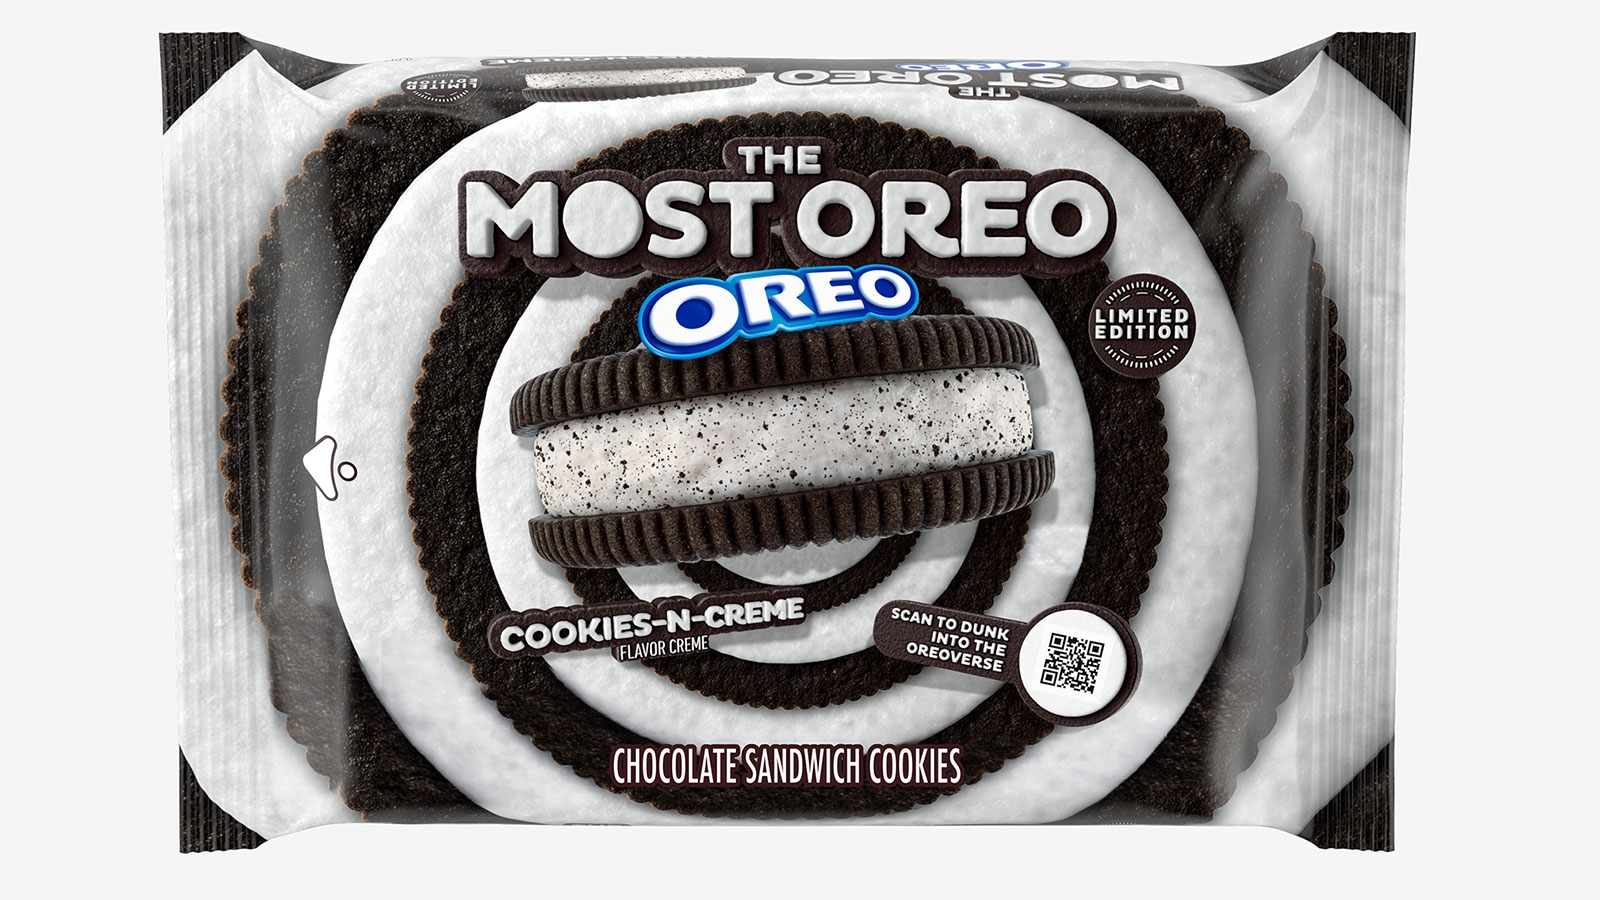 Oreo rolls out new flavor Oreoflavored Oreos